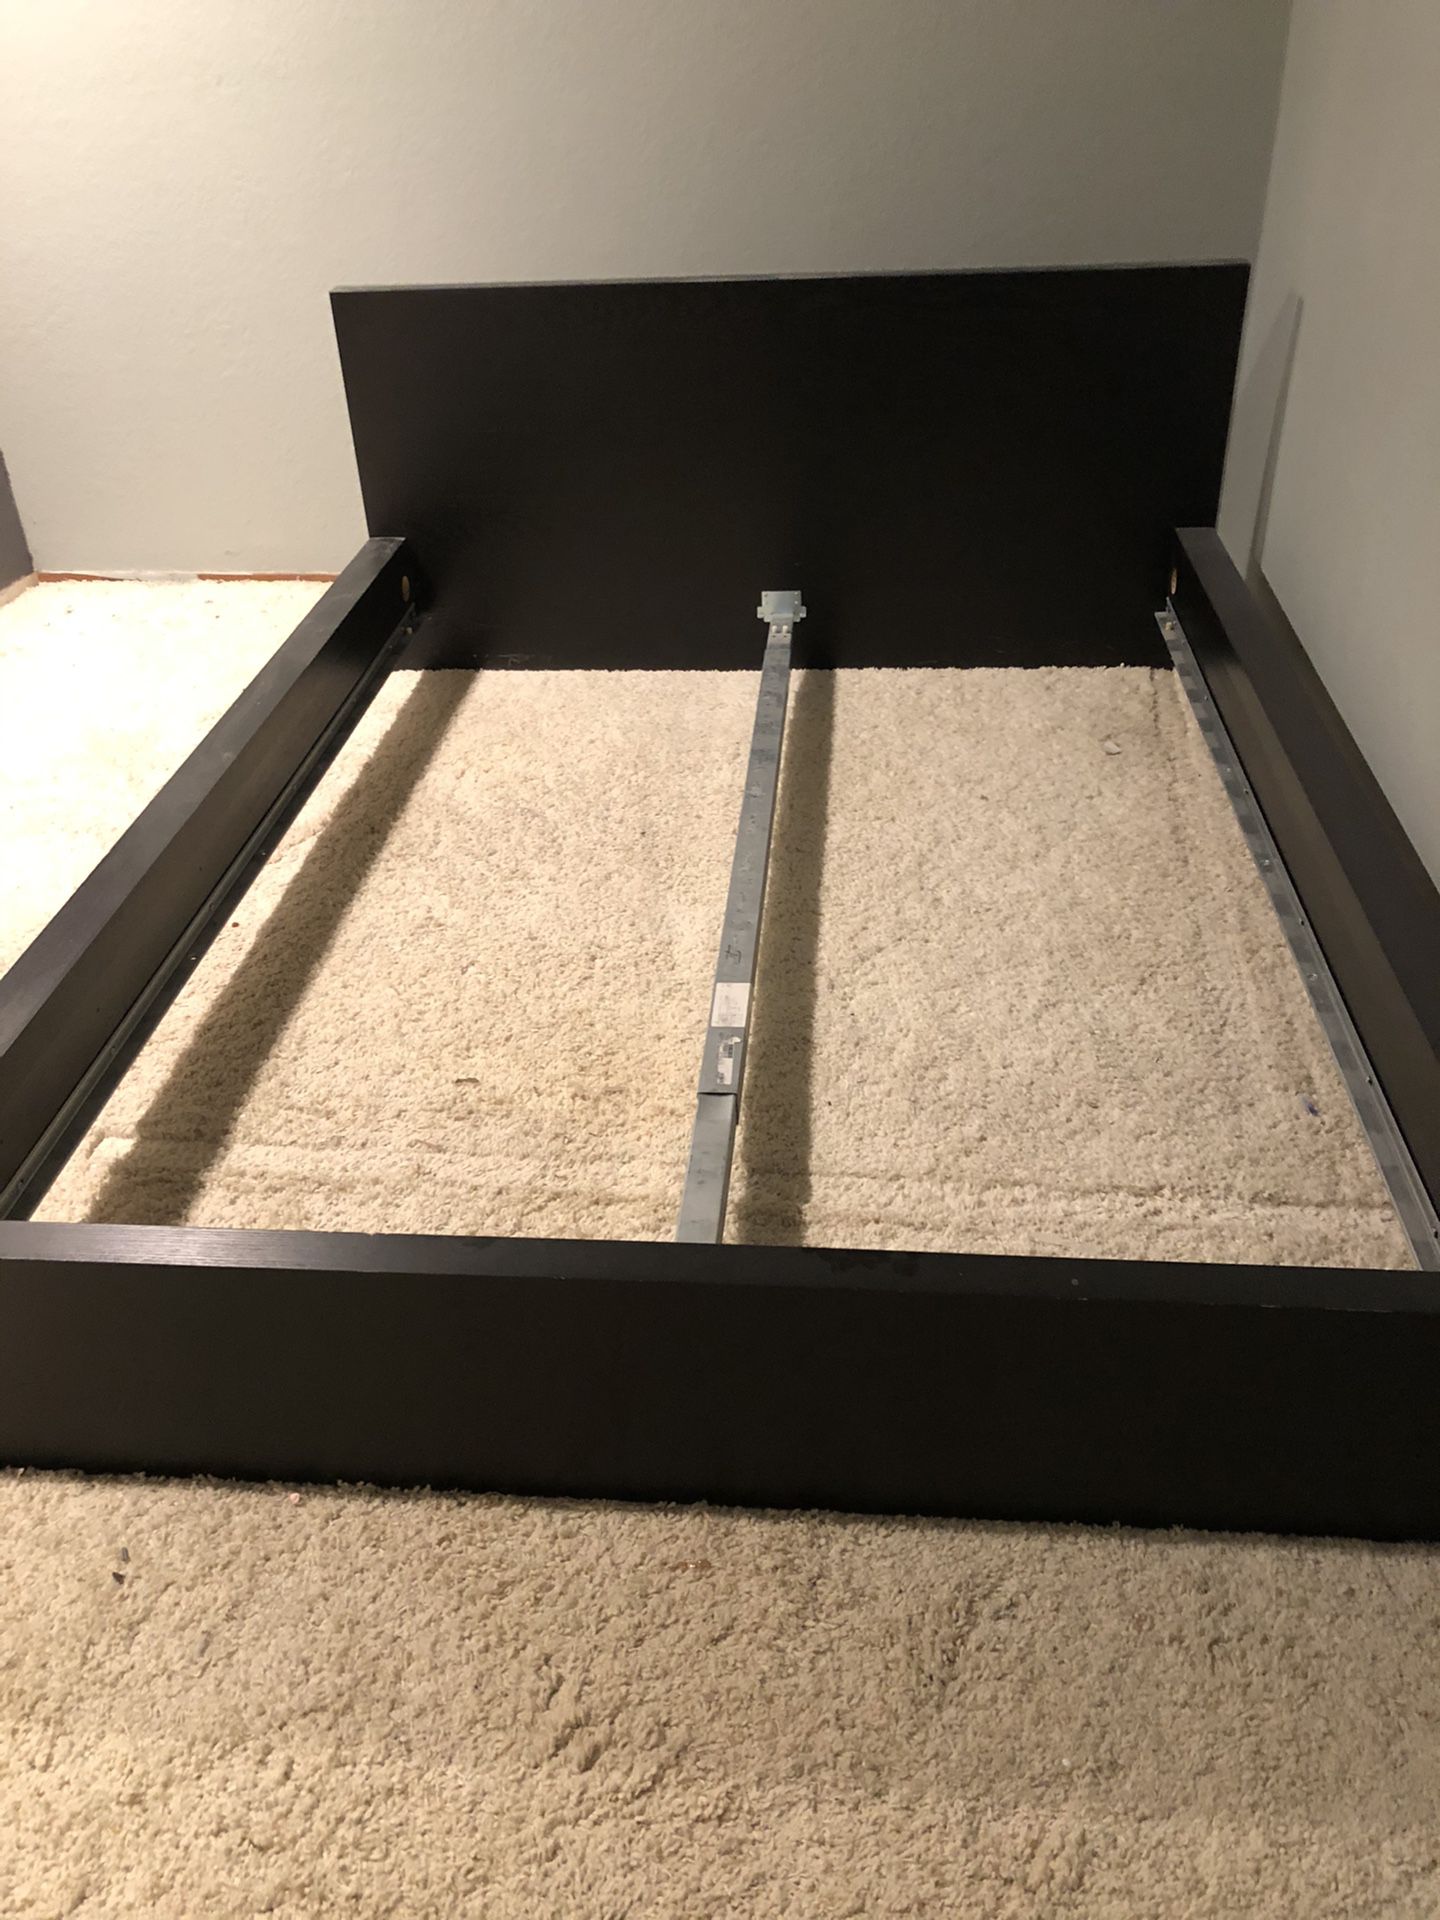 IKEA malm bed frame - Queen